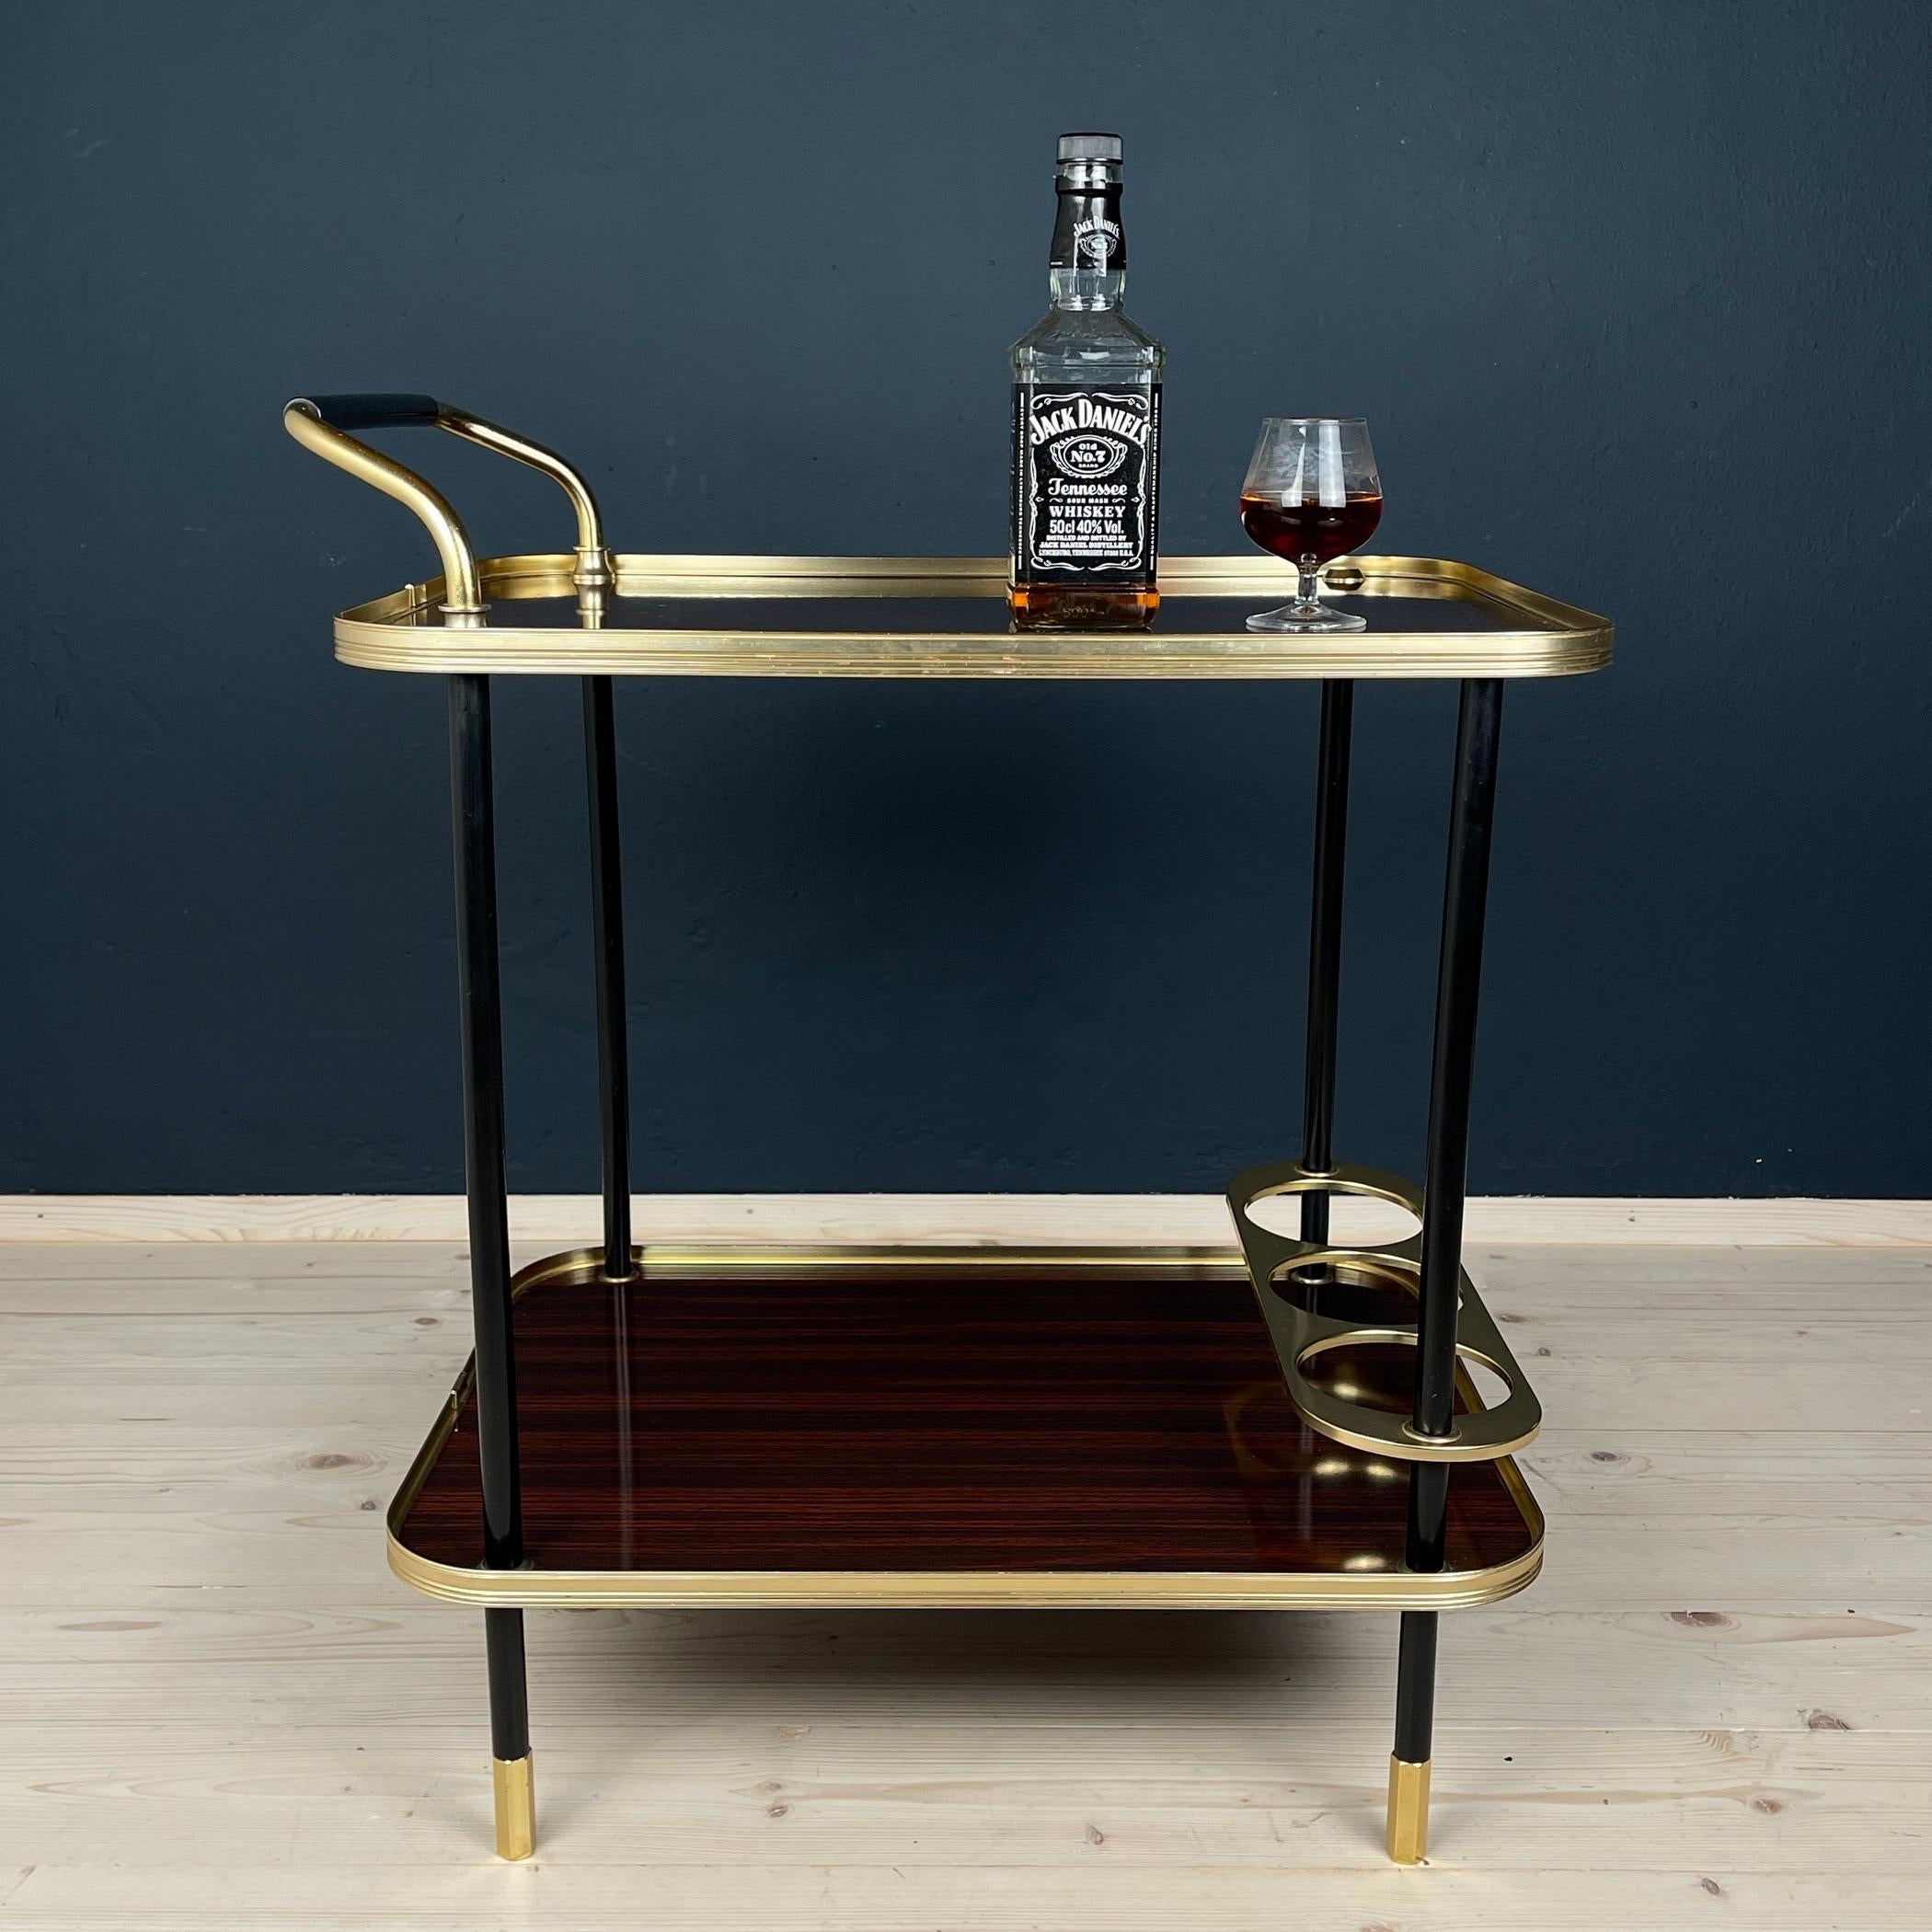 Behold the exquisite bottle trolley, a masterpiece designed in Italy by Ico and Luisa Parisi for Mb Italia in the glamorous era of the 1960s. This creation is a captivating fusion of materials, seamlessly blending Formica, aluminum, and gold metal